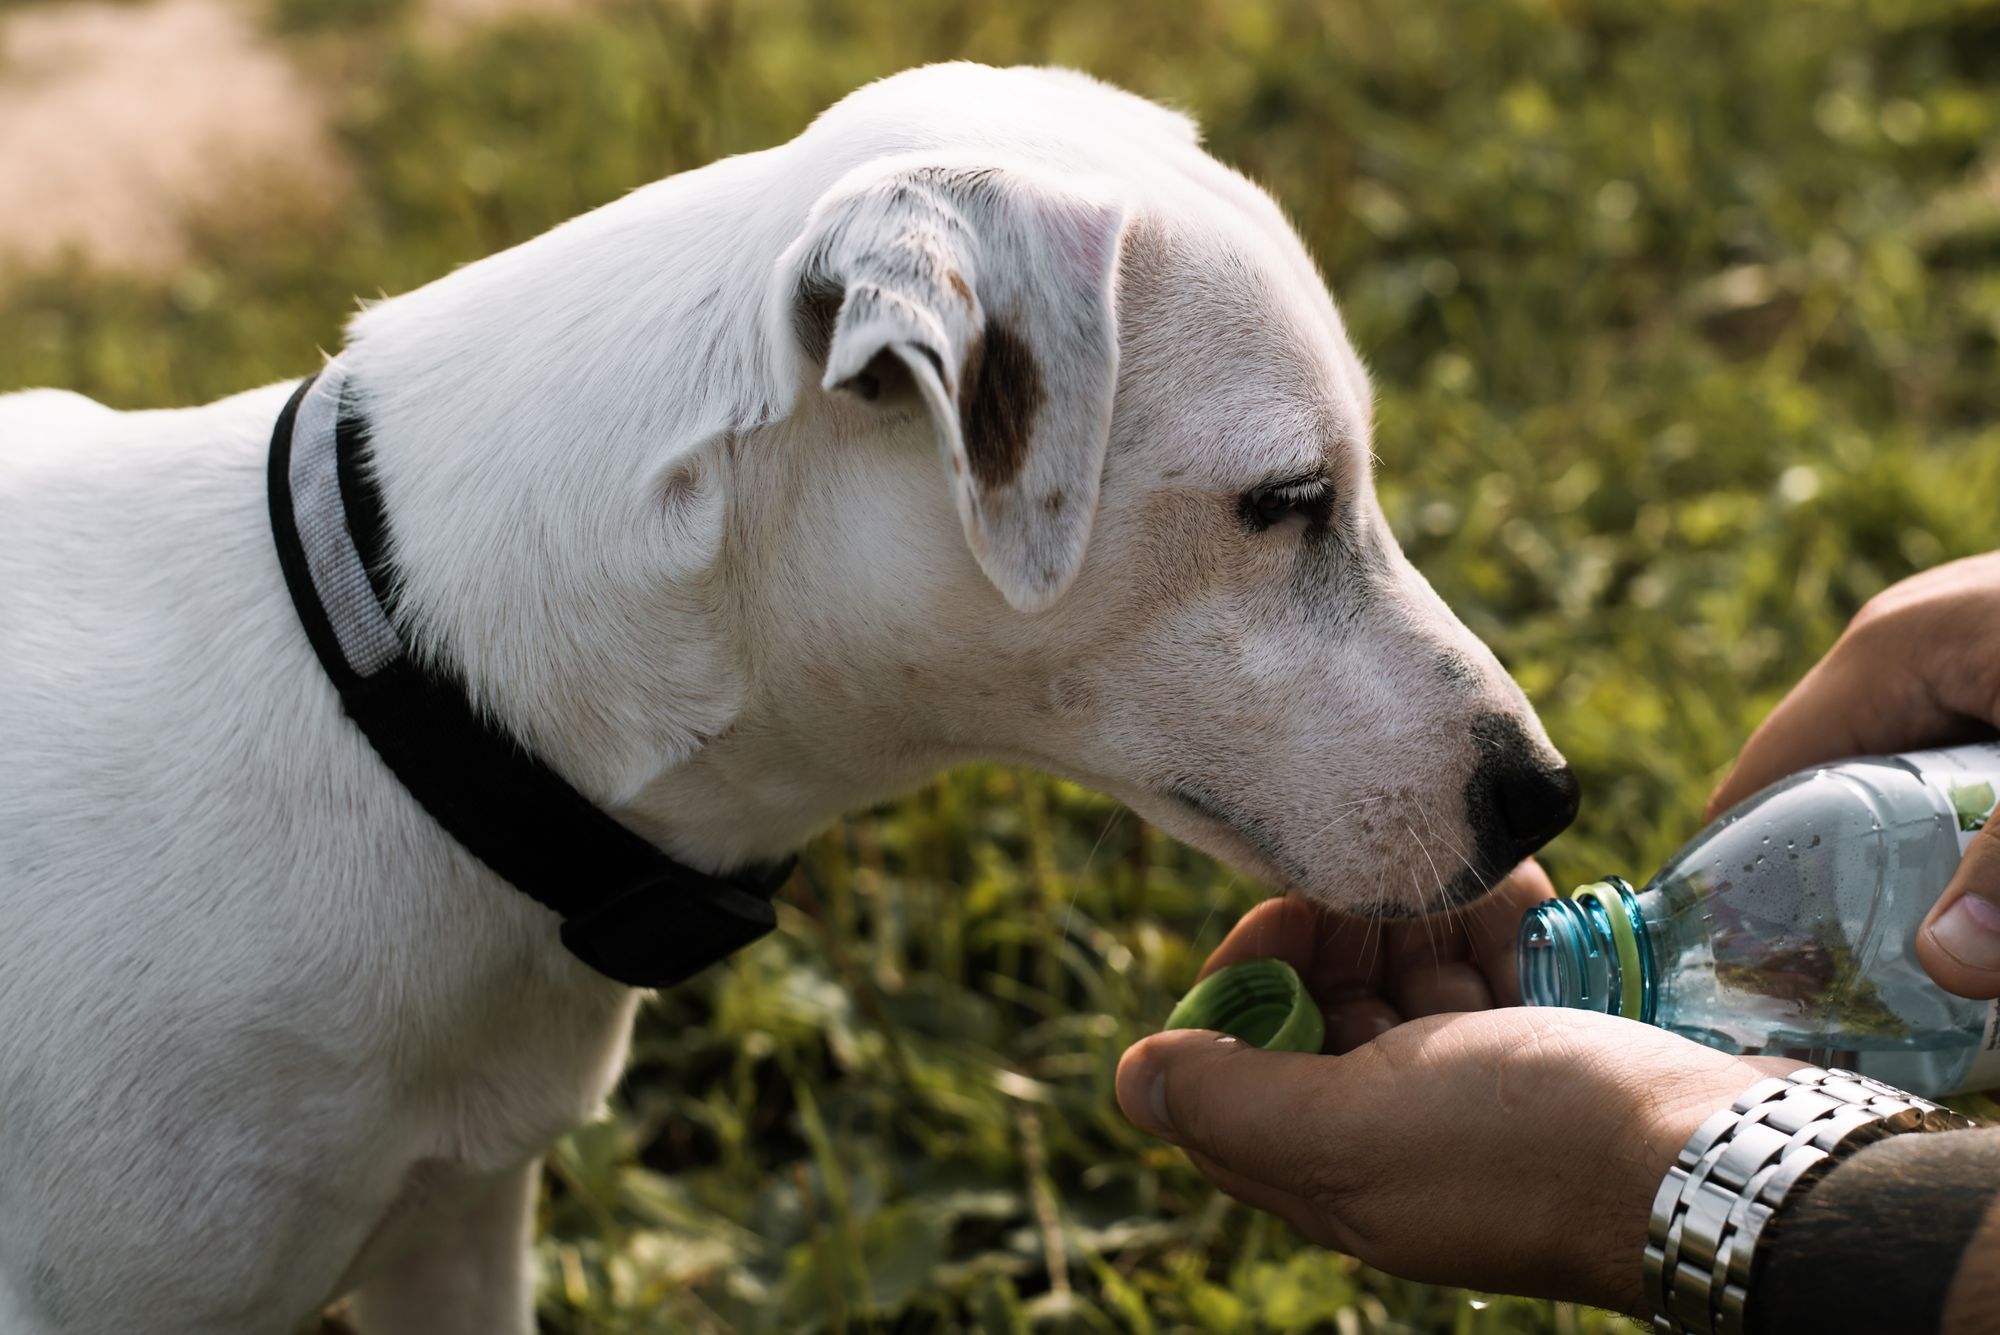 Jack Russell Terrier drinks water from a human hand. Close-up of the owner watering his dog outdoors